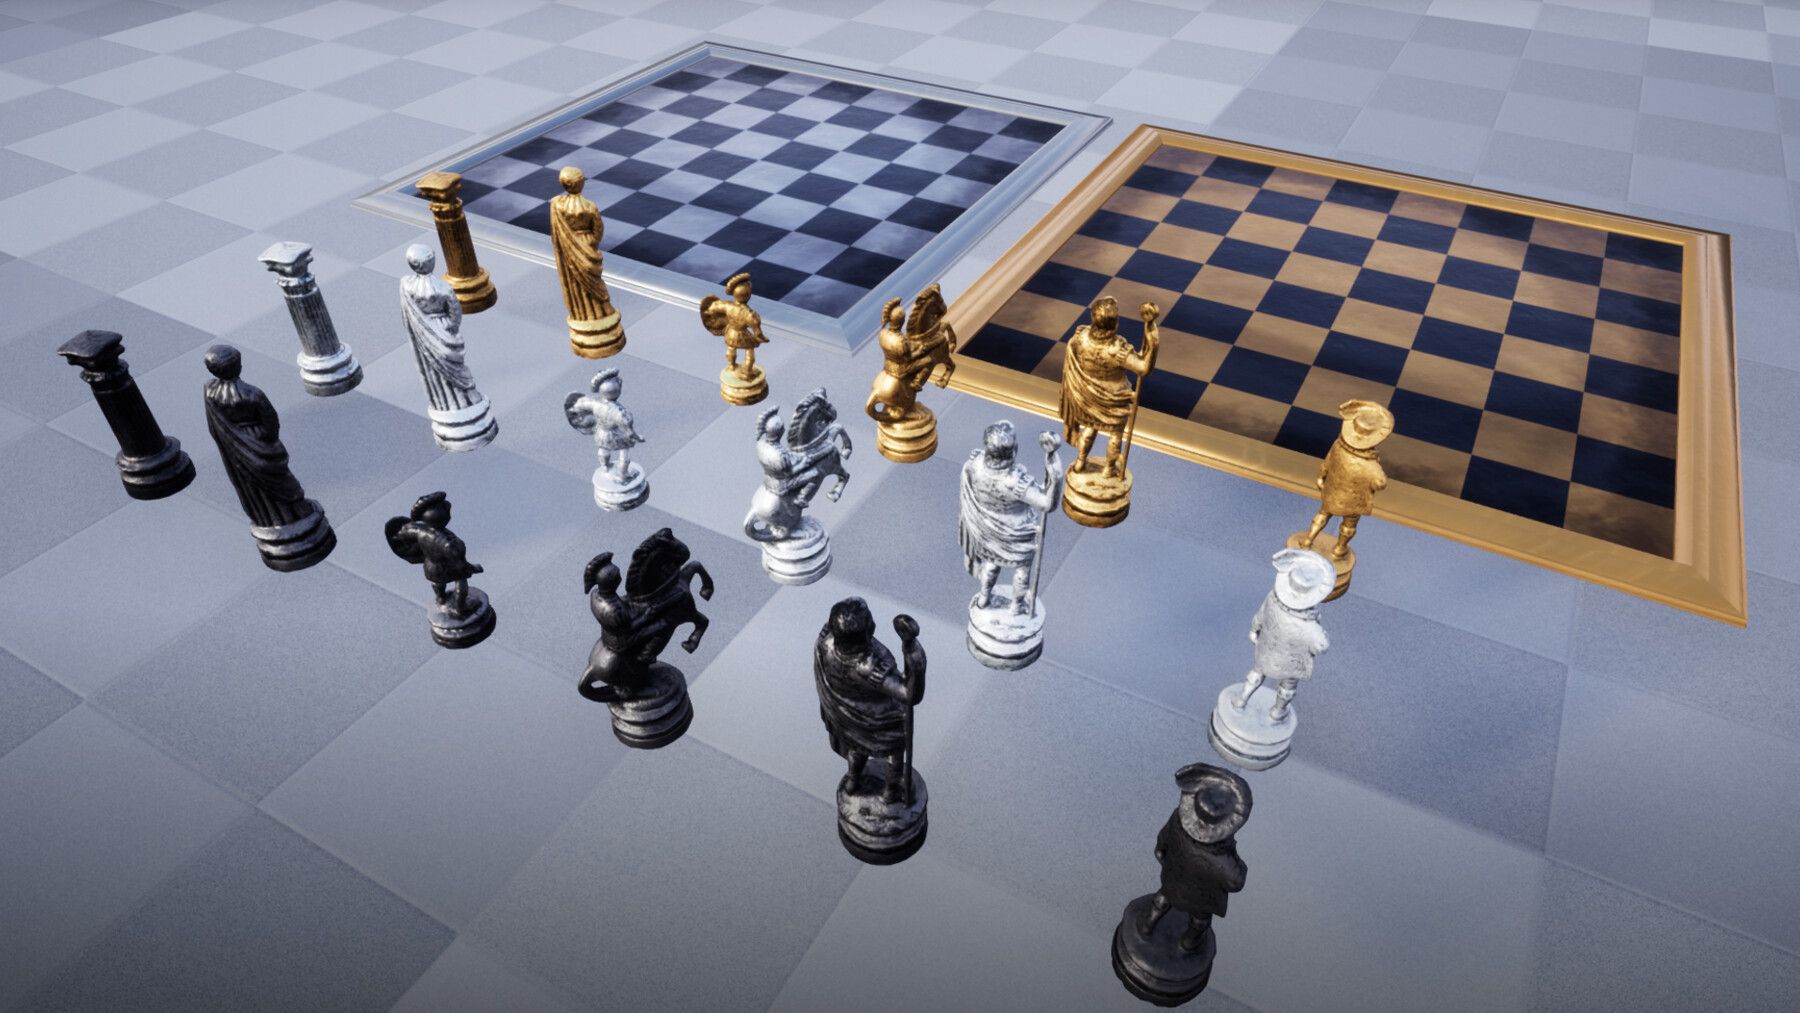 engines - Render a chessboard from a PGN file - Chess Stack Exchange